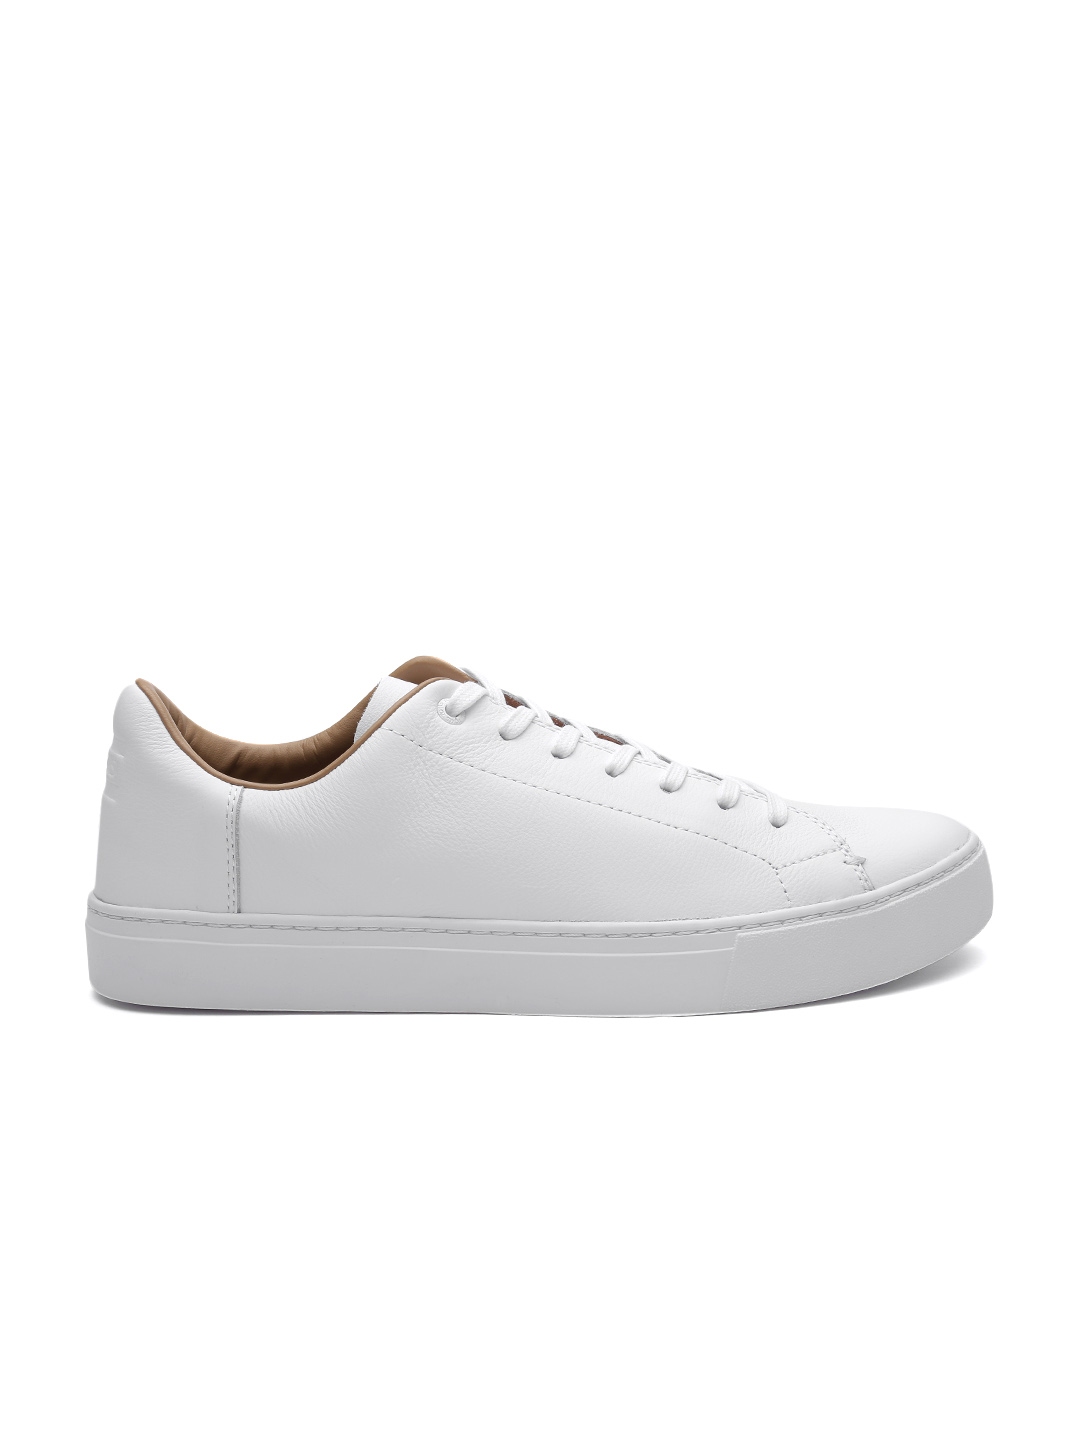 Buy TOMS Men White Leather Sneakers - Casual Shoes for Men 1852129 | Myntra